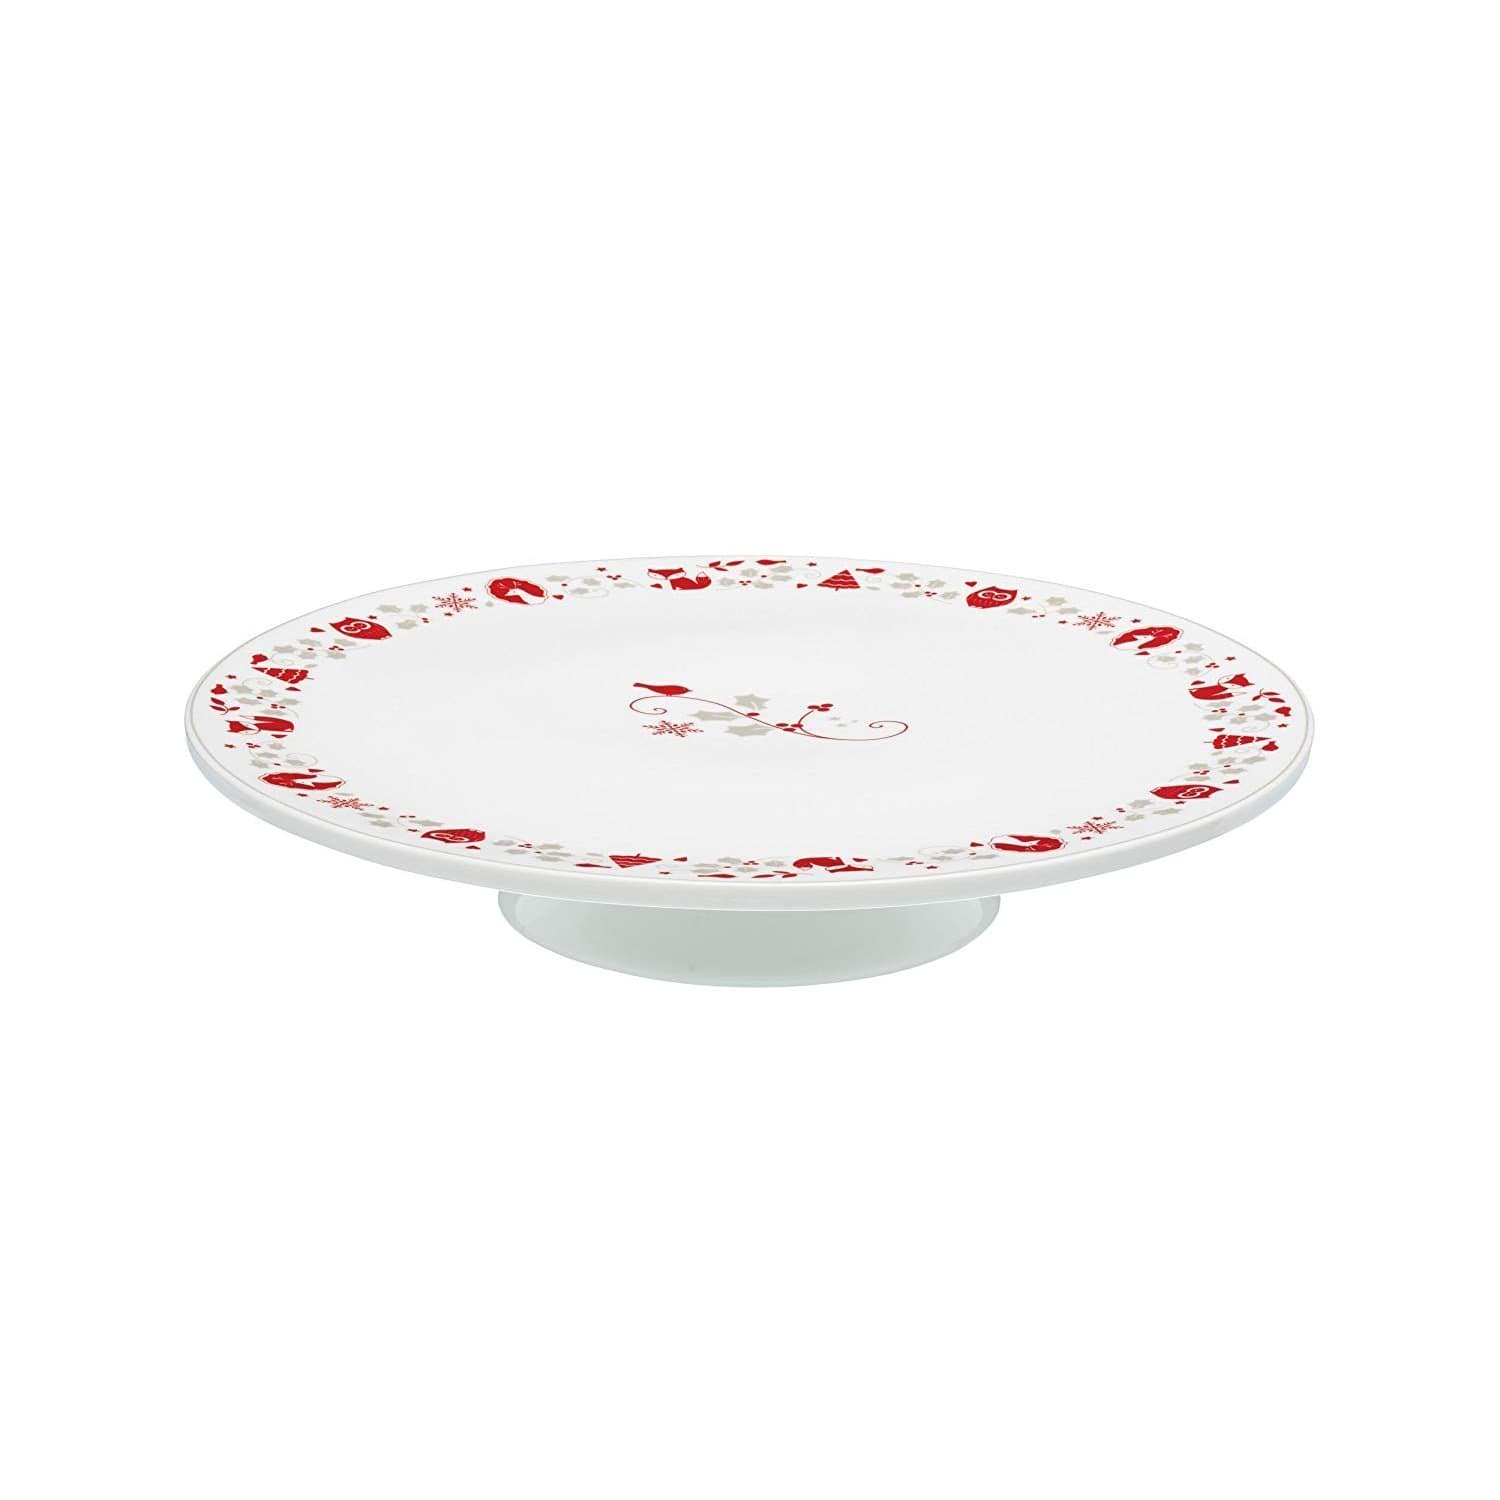 Kitchen Craft Winter Woodland Christmas Cake Stand - Red and White, 30 x 5 cm - FFCAKES - Jashanmal Home